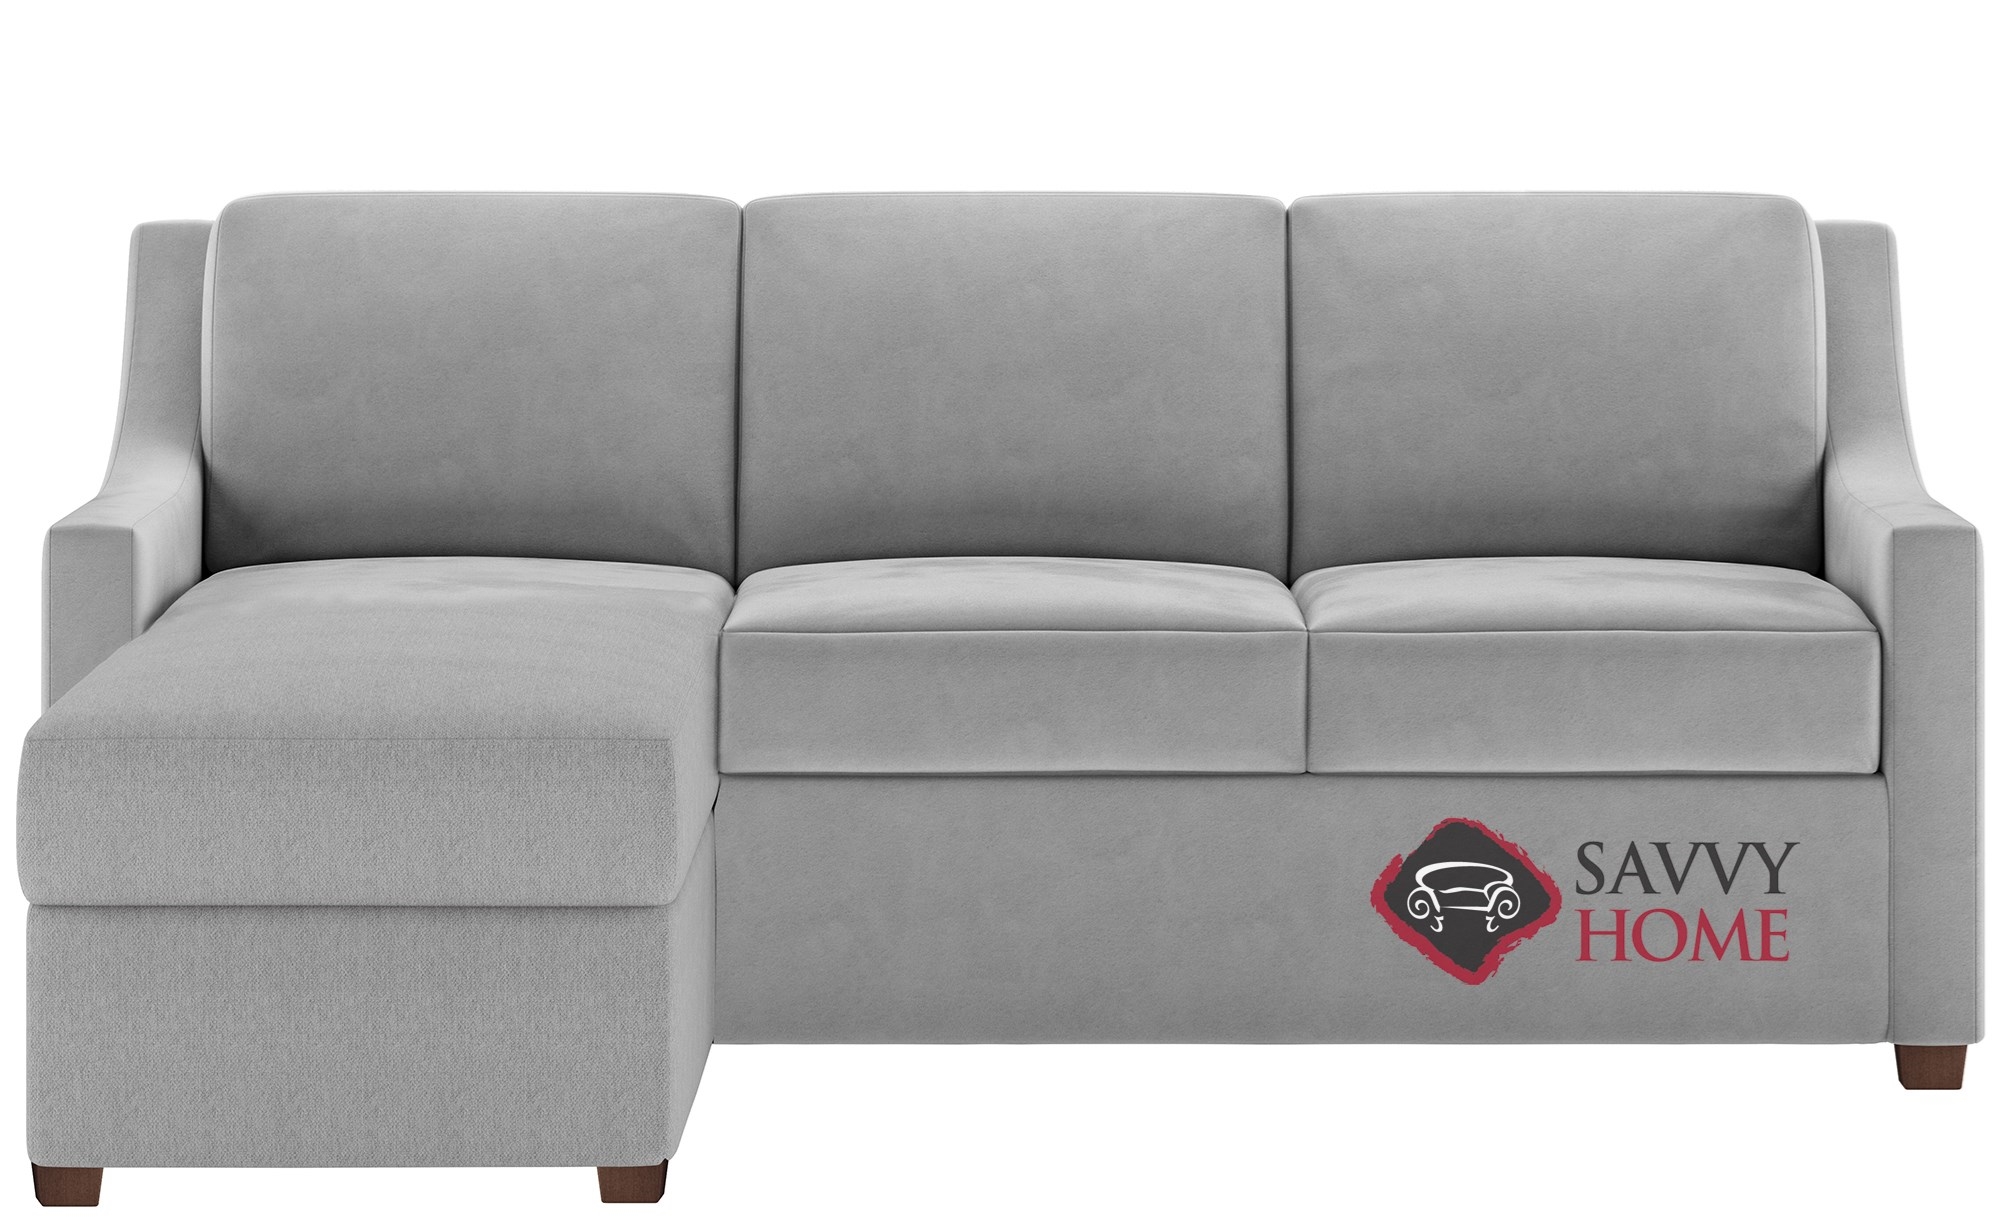 Perry Fabric Sleeper Sofas Queen By, American Leather Sleepers